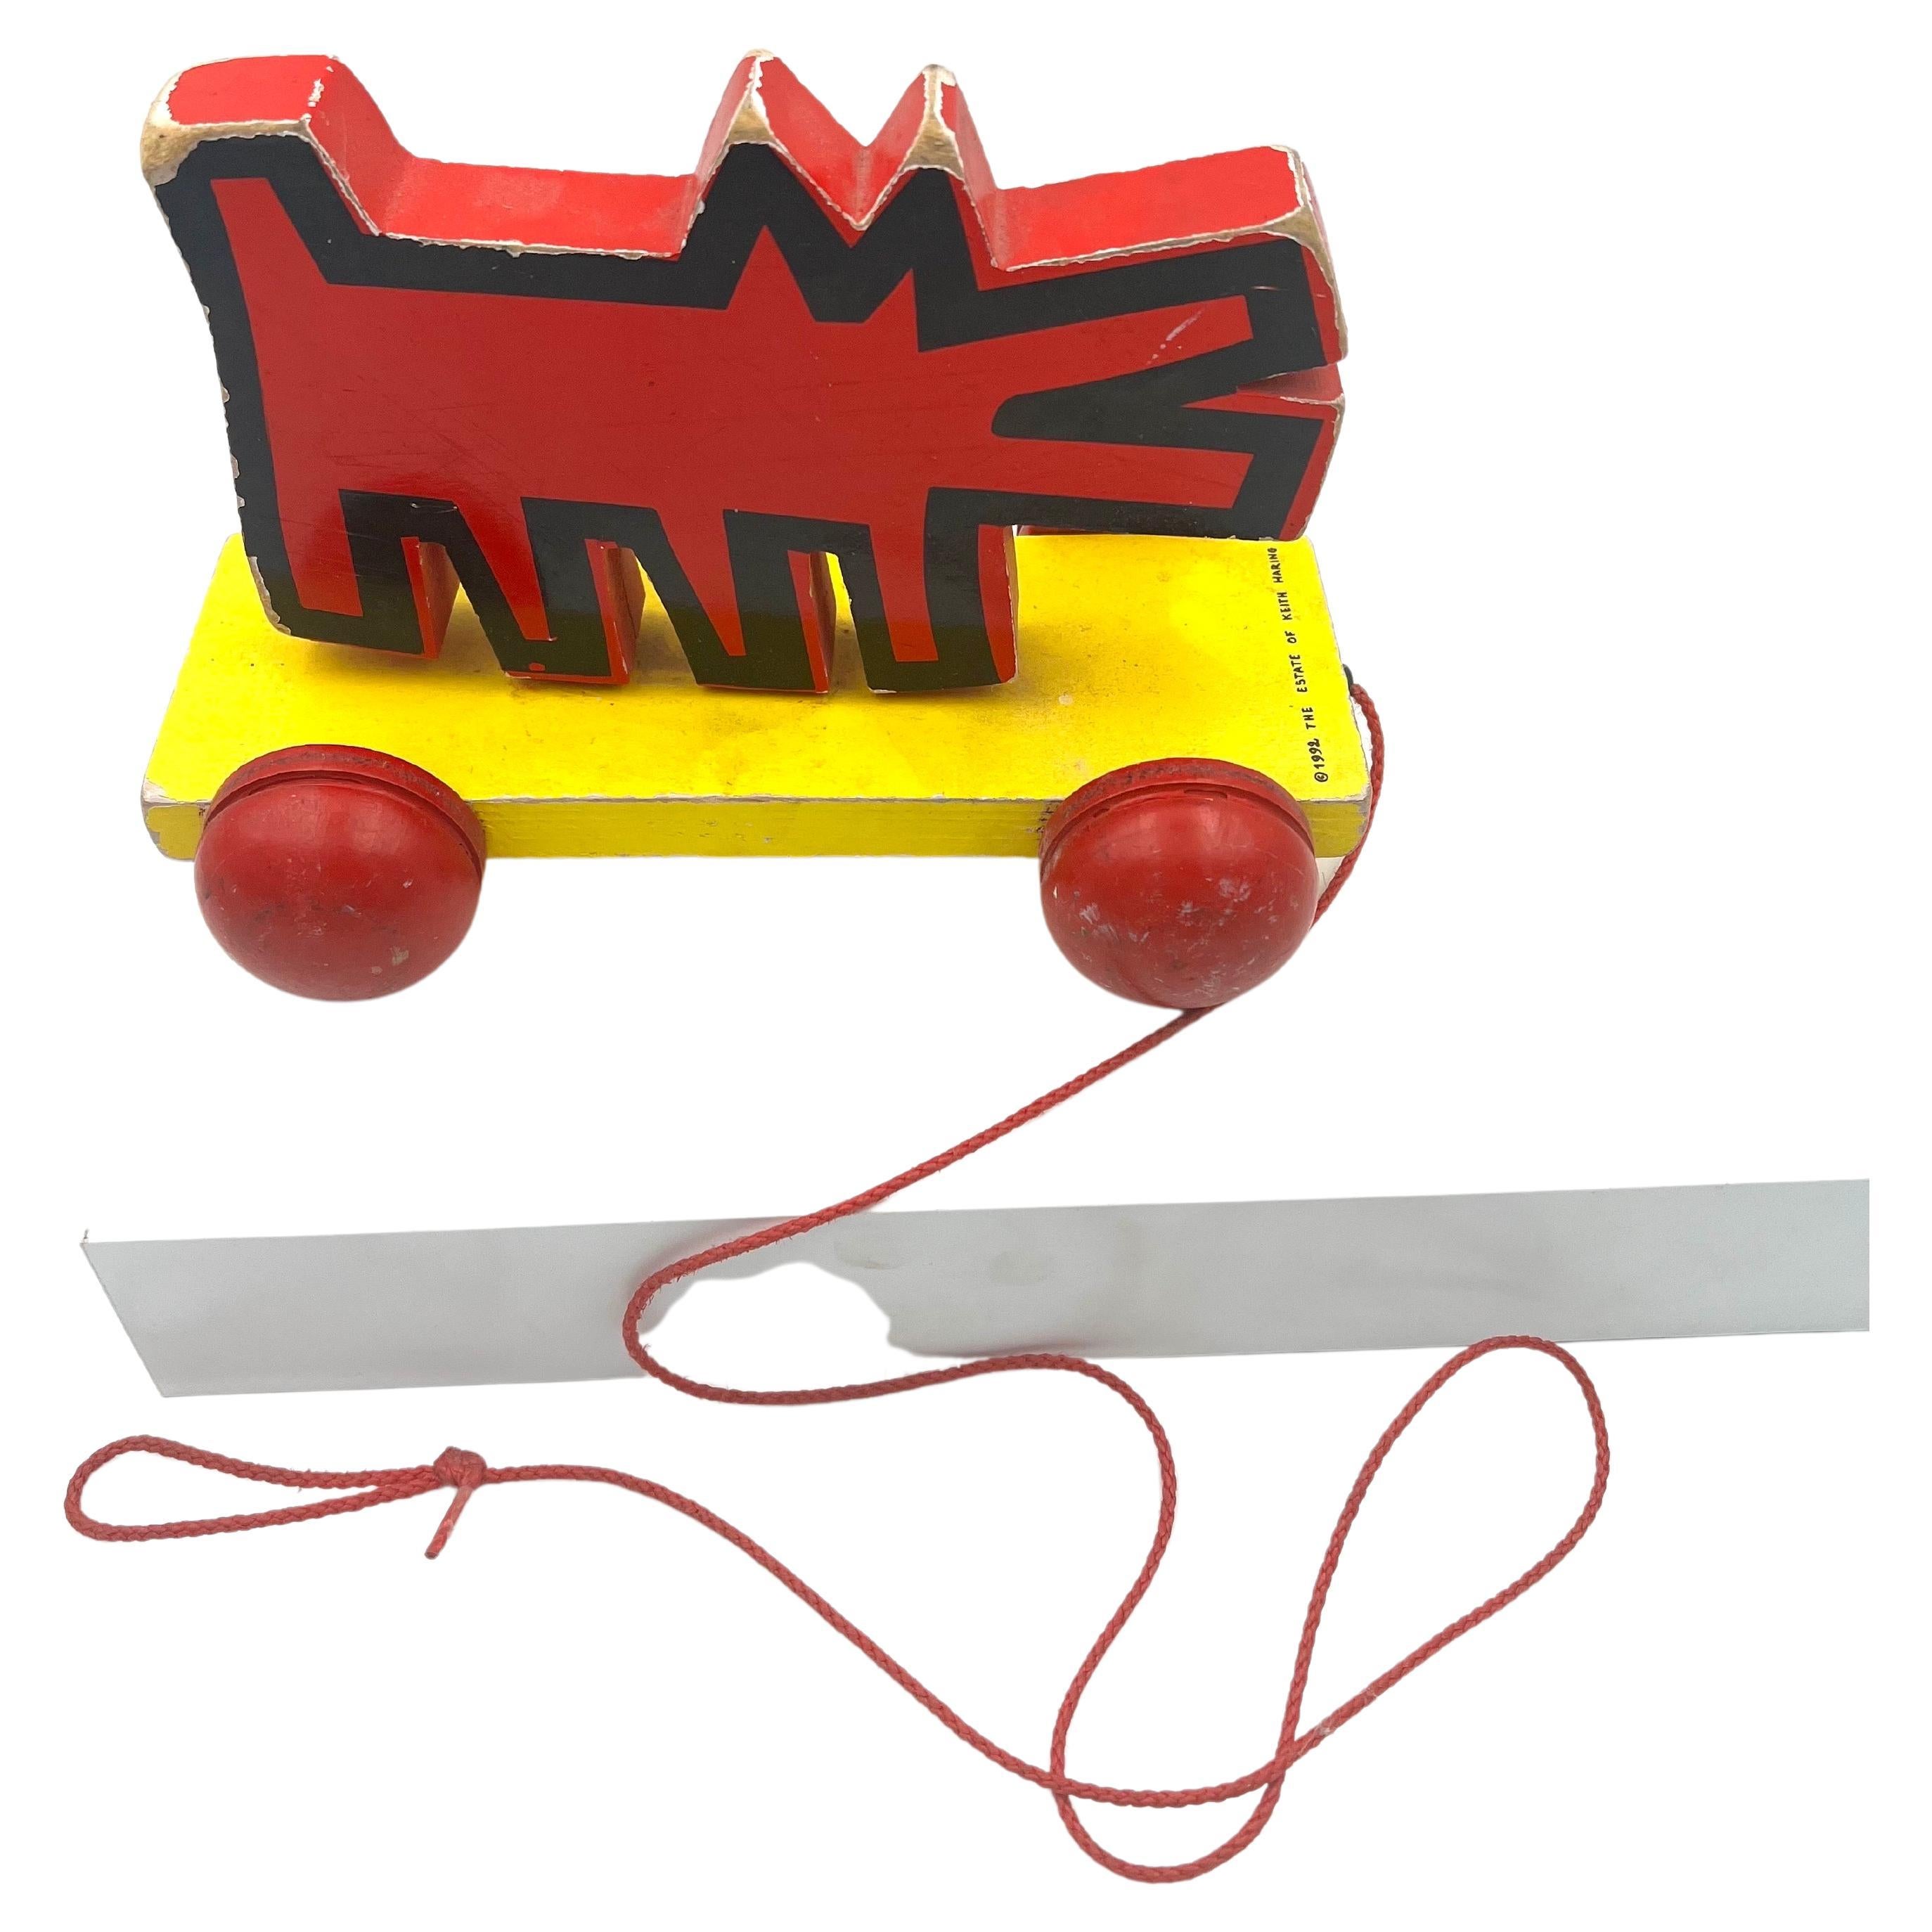 Rare and very collectible pull toy from the state of Keith Haring circa 1992 part of the MOMA collection, made in France wood painted finish well played original condition some scuffs and marks due to age and its a toy.